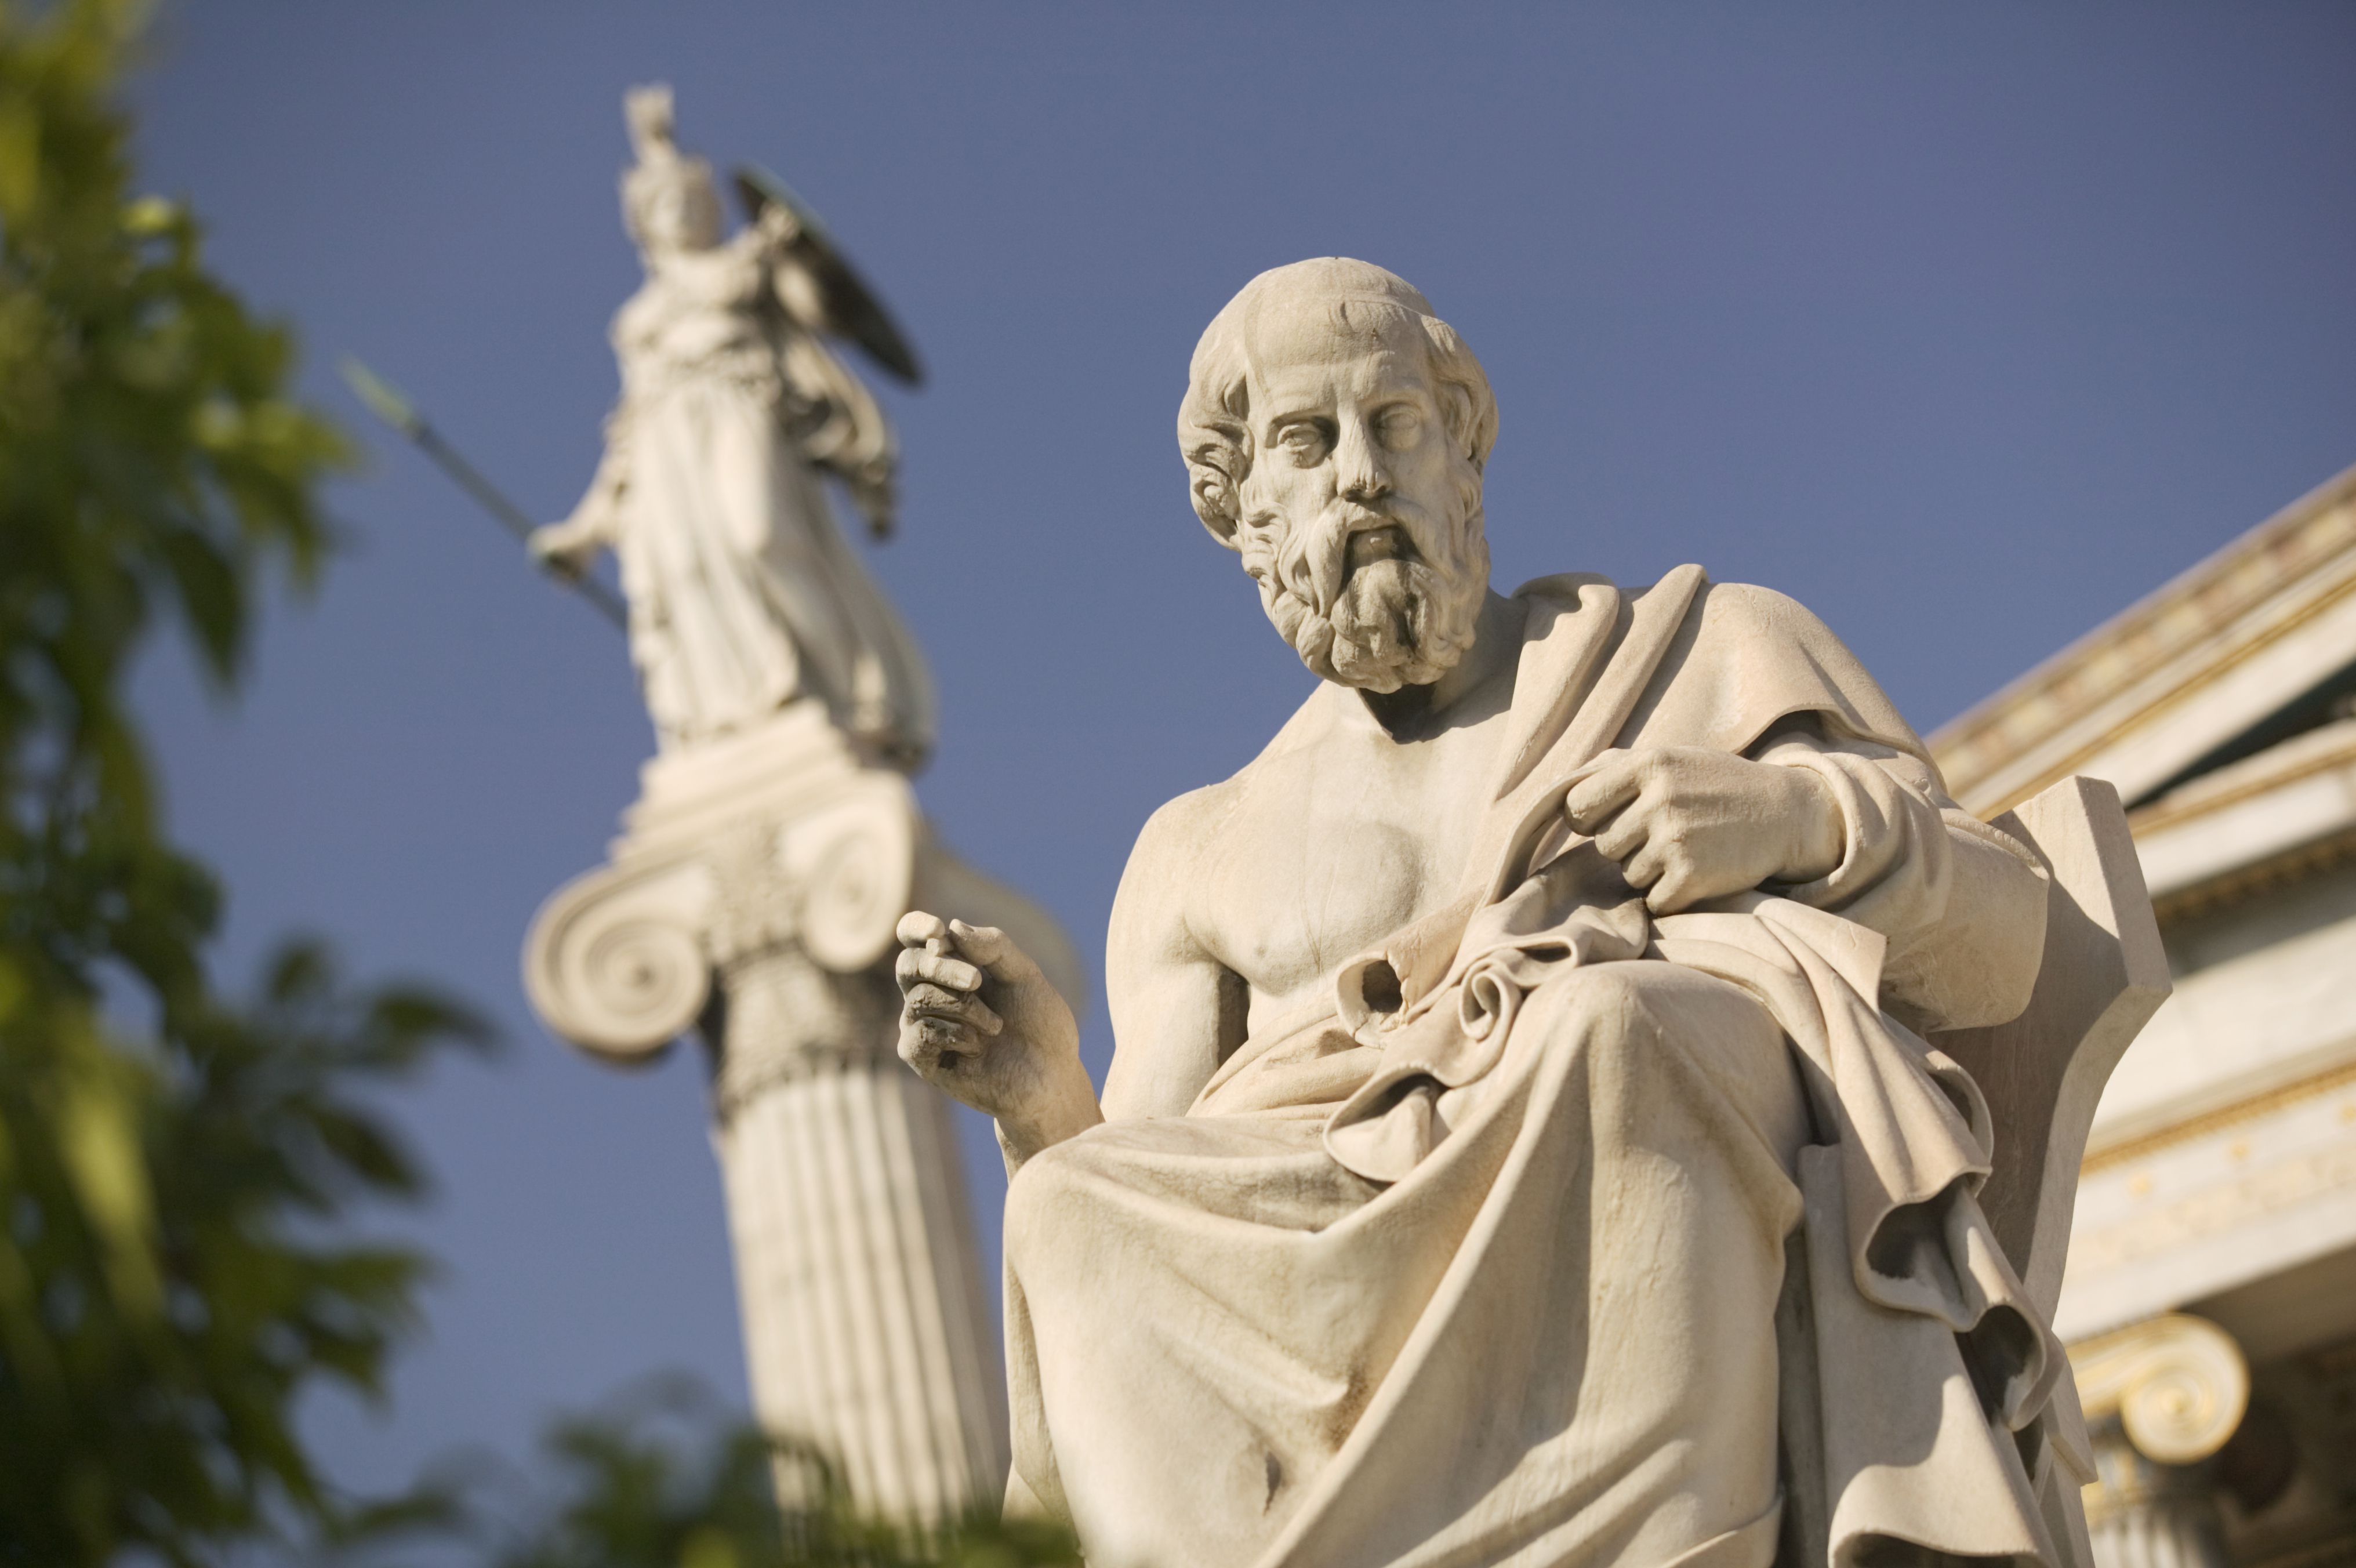 plato-statue-outside-the-hellenic-academy-520346492-589ceaab3df78c475875af25.jpg